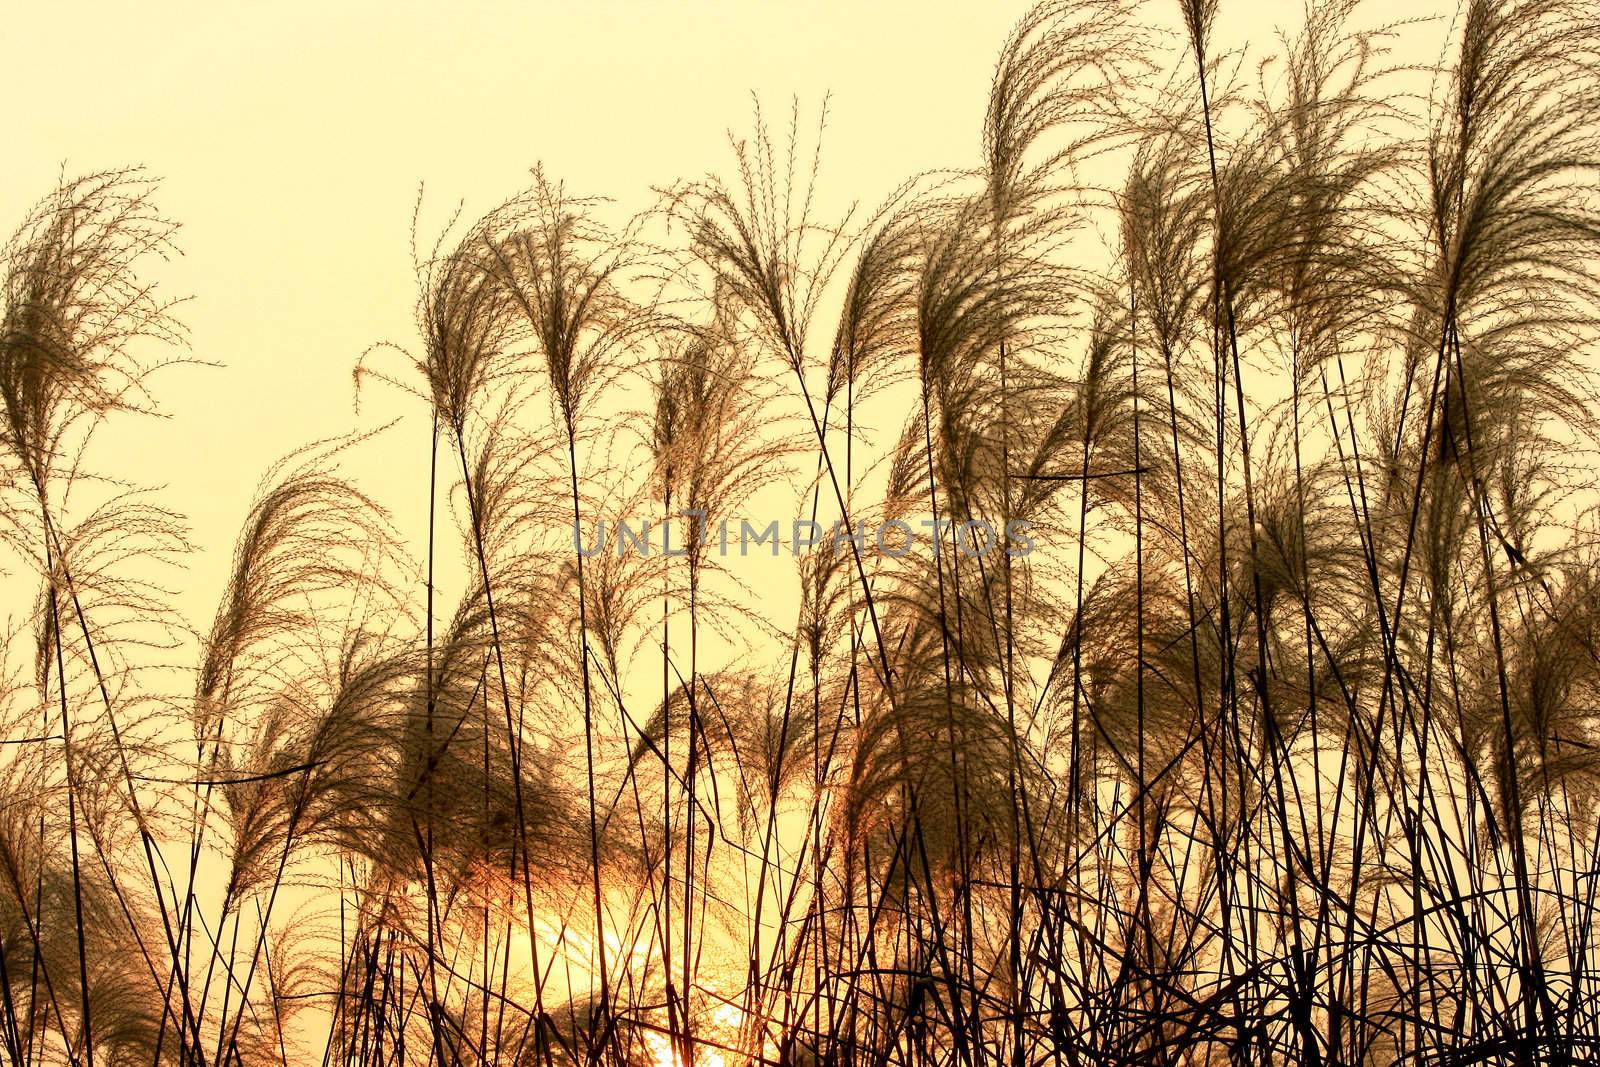 Silhouette Of Tall Grass by sacatani